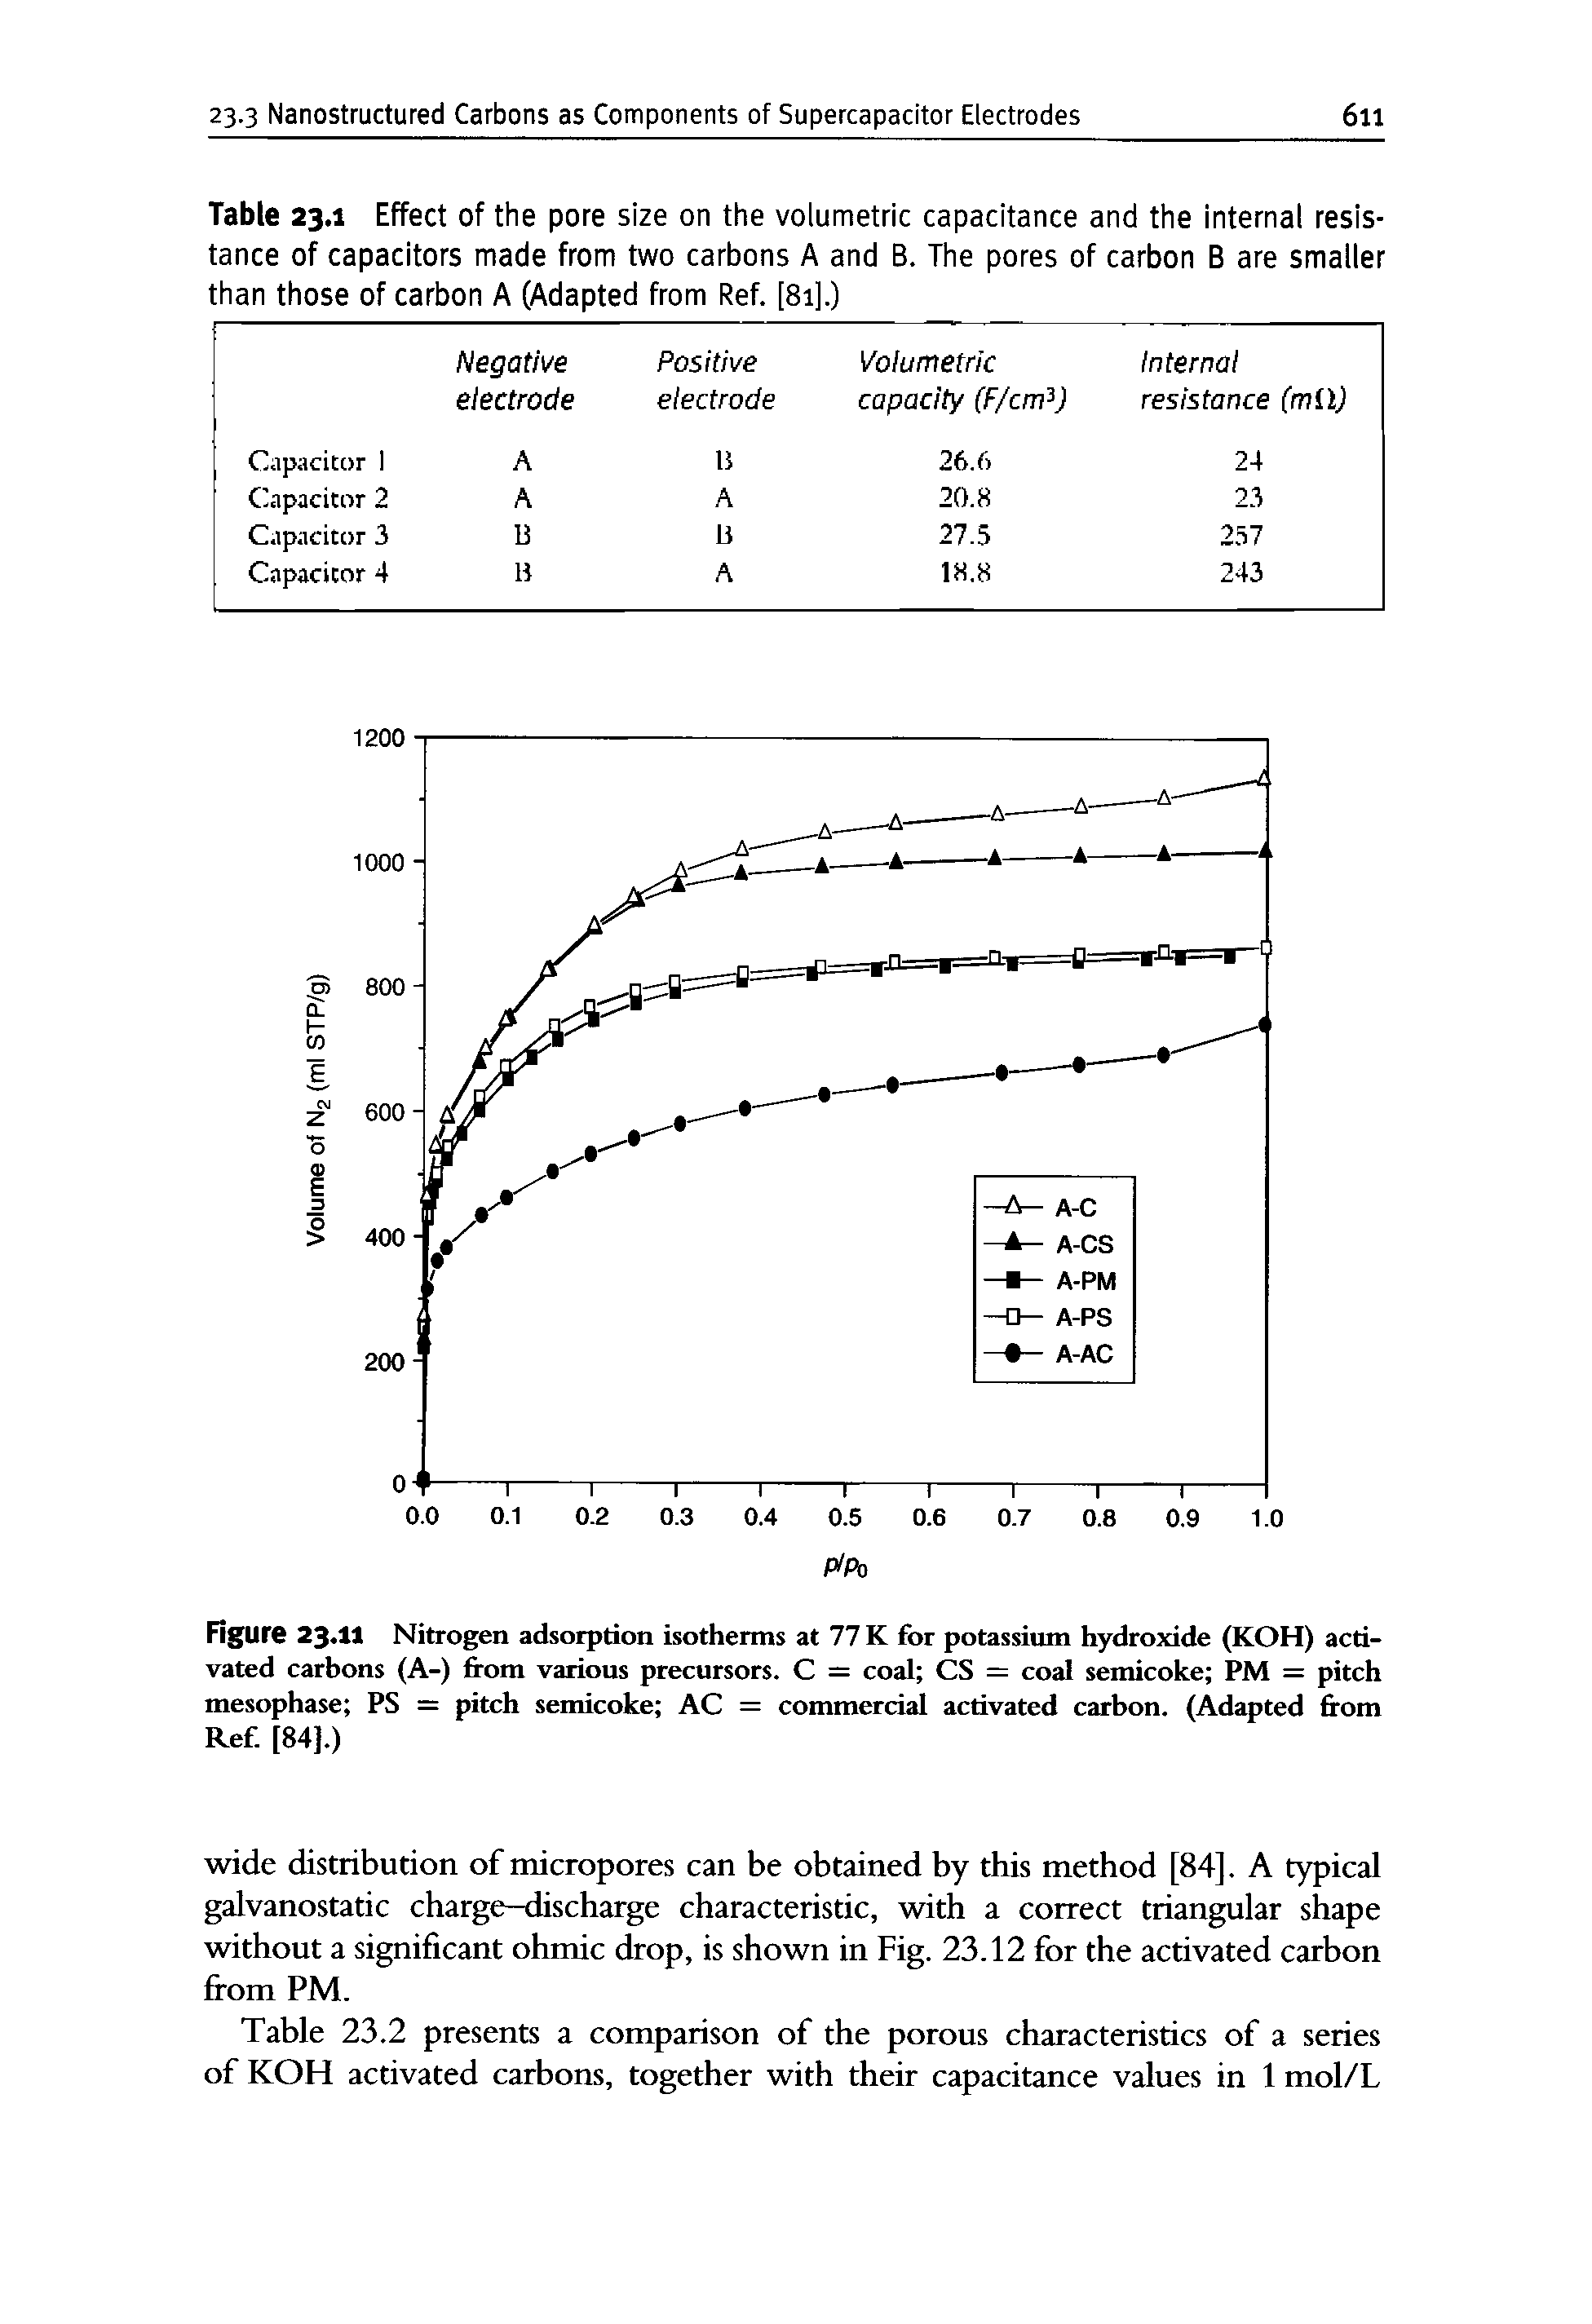 Table 23.1 Effect of the pore size on the volumetric capacitance and the internal resistance of capacitors made from two carbons A and B. The pores of carbon B are smaller than those of carbon A (Adapted from Ref. [81].)...